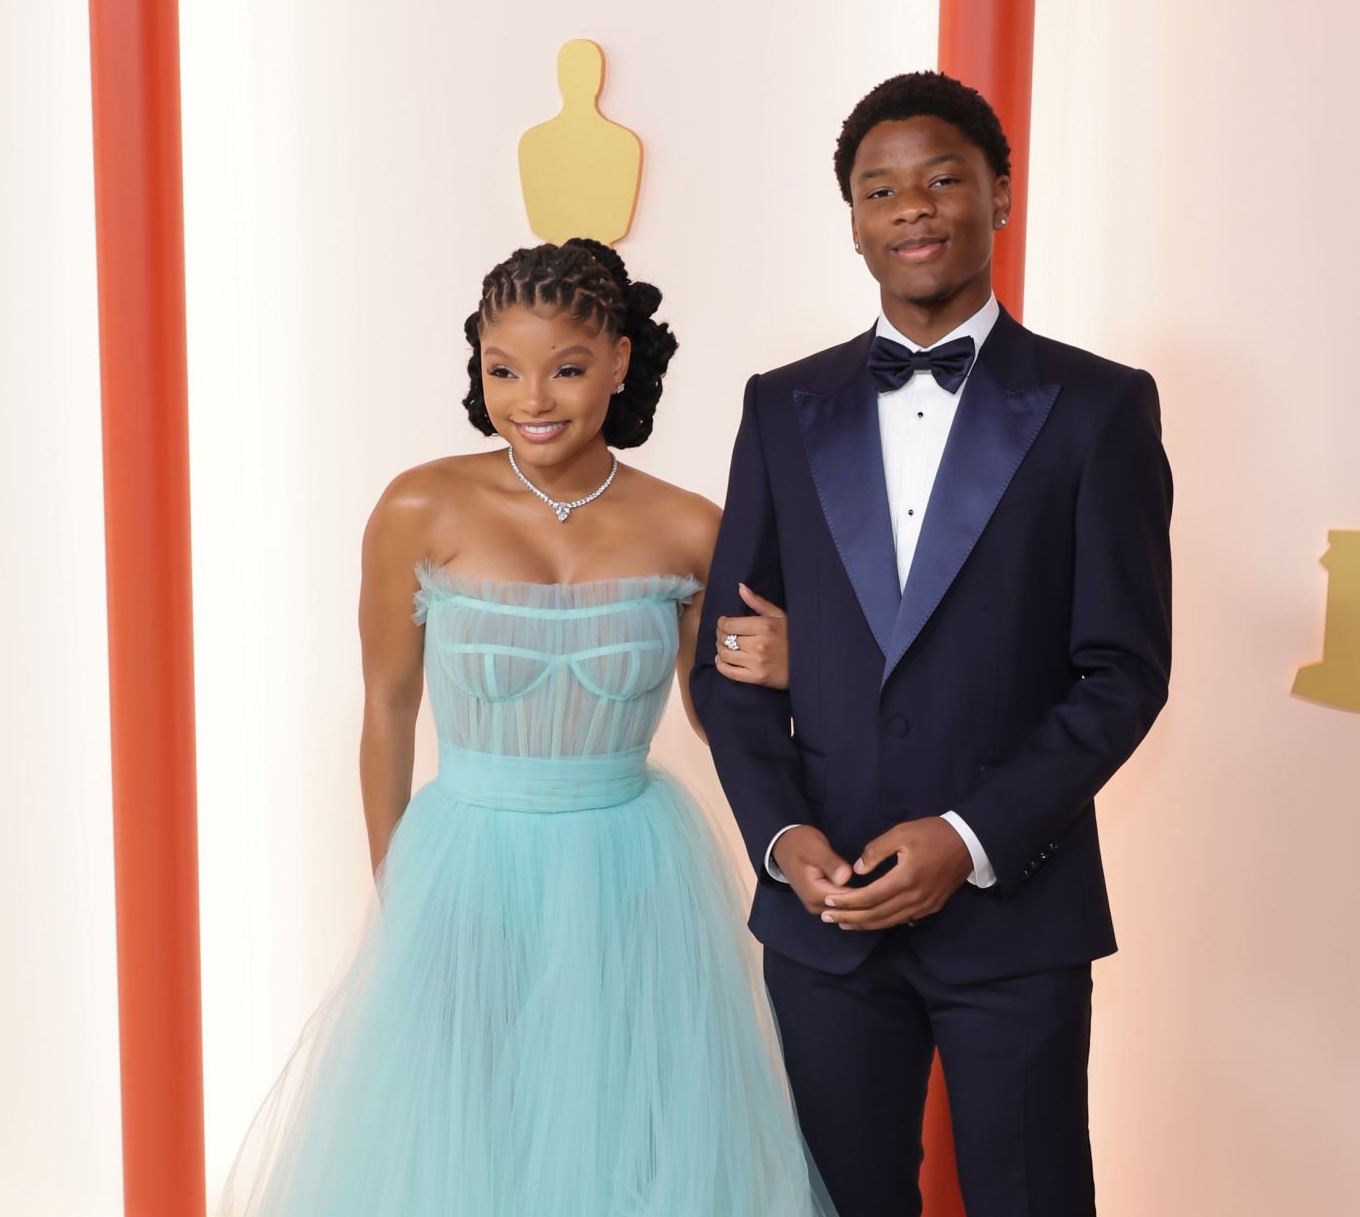 Halle Bailey and Branson Bailey attended the 95th Annual Academy Awards in March 2023 